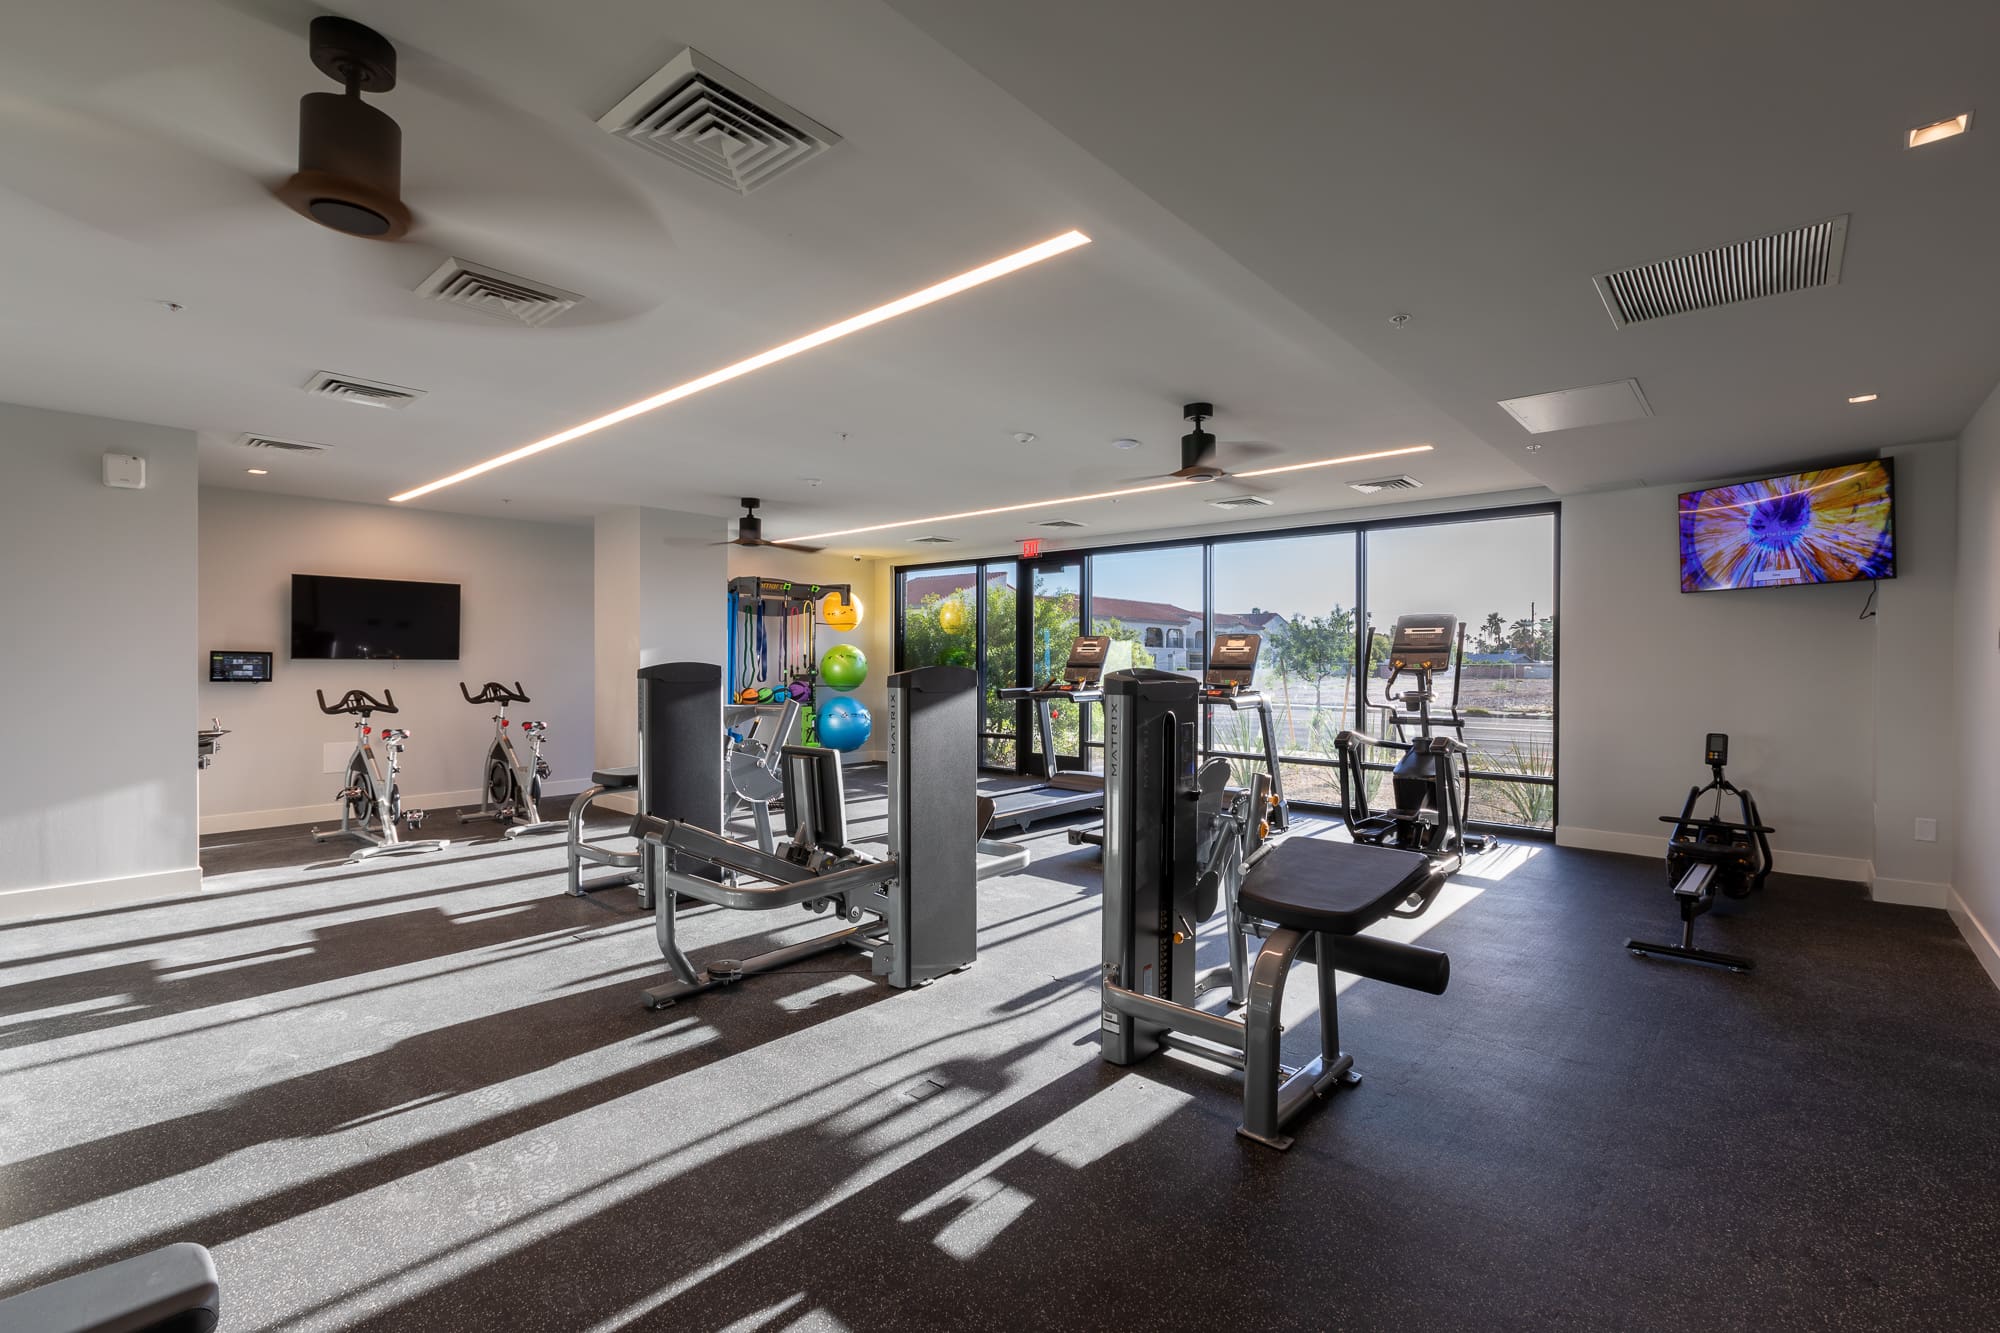 A modern, well-equipped gym with treadmills, weight machines, and stability balls, featuring large windows that offer a view of the outside.